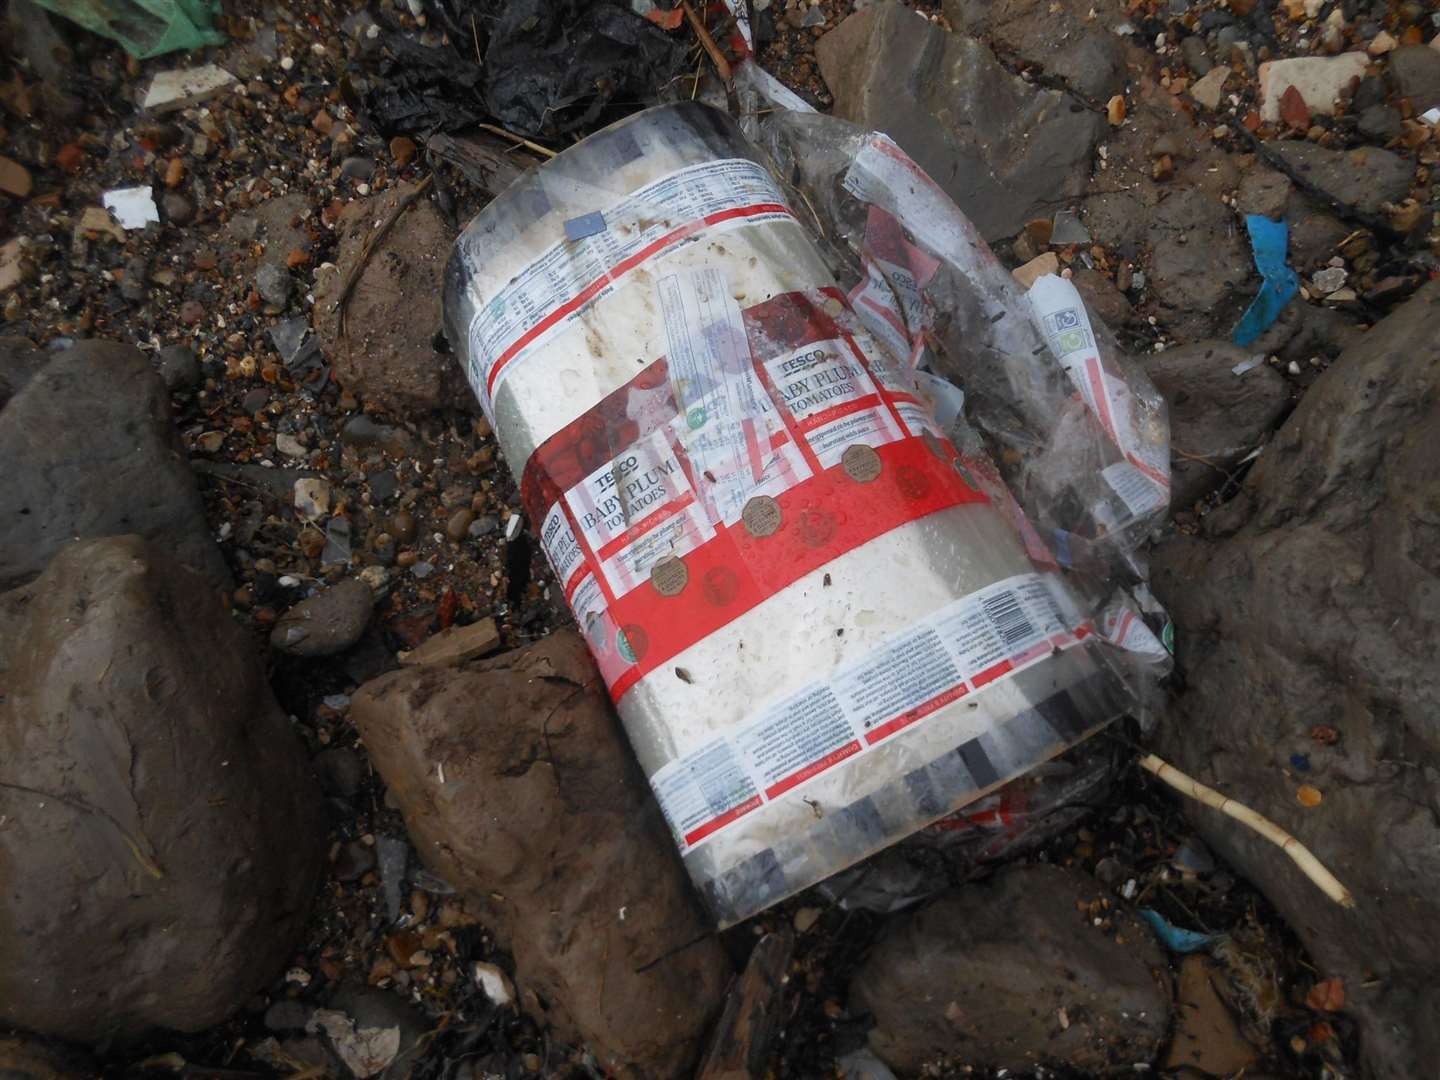 The Tesco tomato wrappers washed up in Eastchurch. Picture: Daniel Hogburn